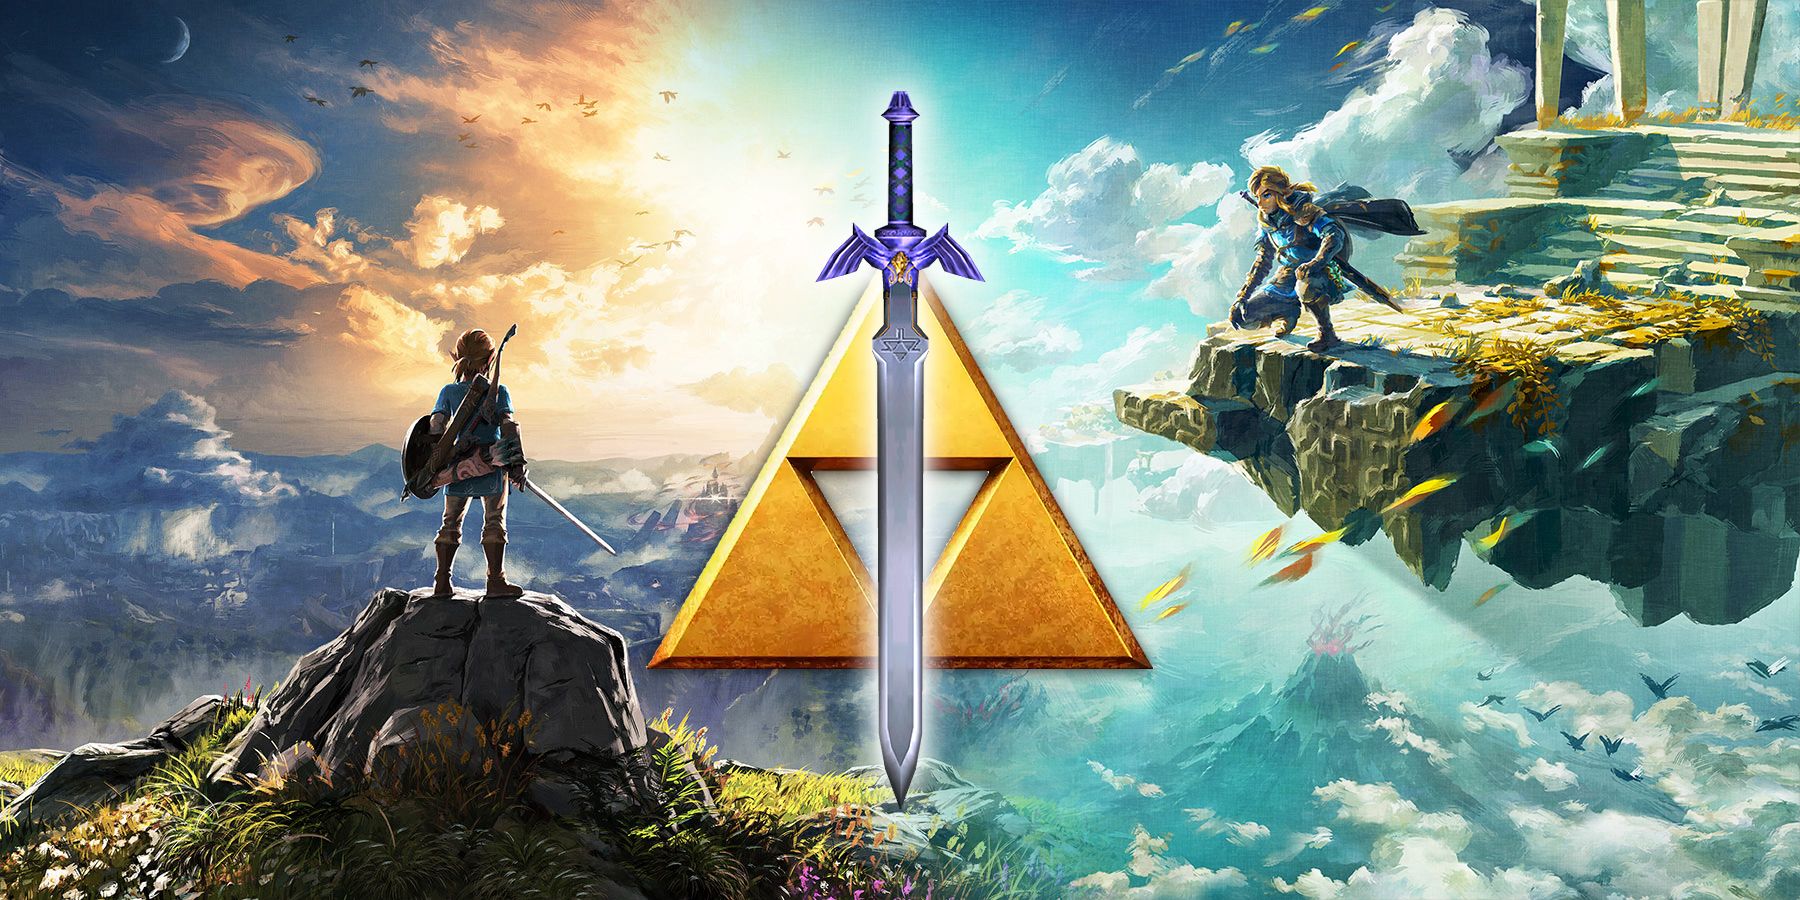 Master Sword and Triforce in front of Breath of the Wild and Tears of the Kingdom key art